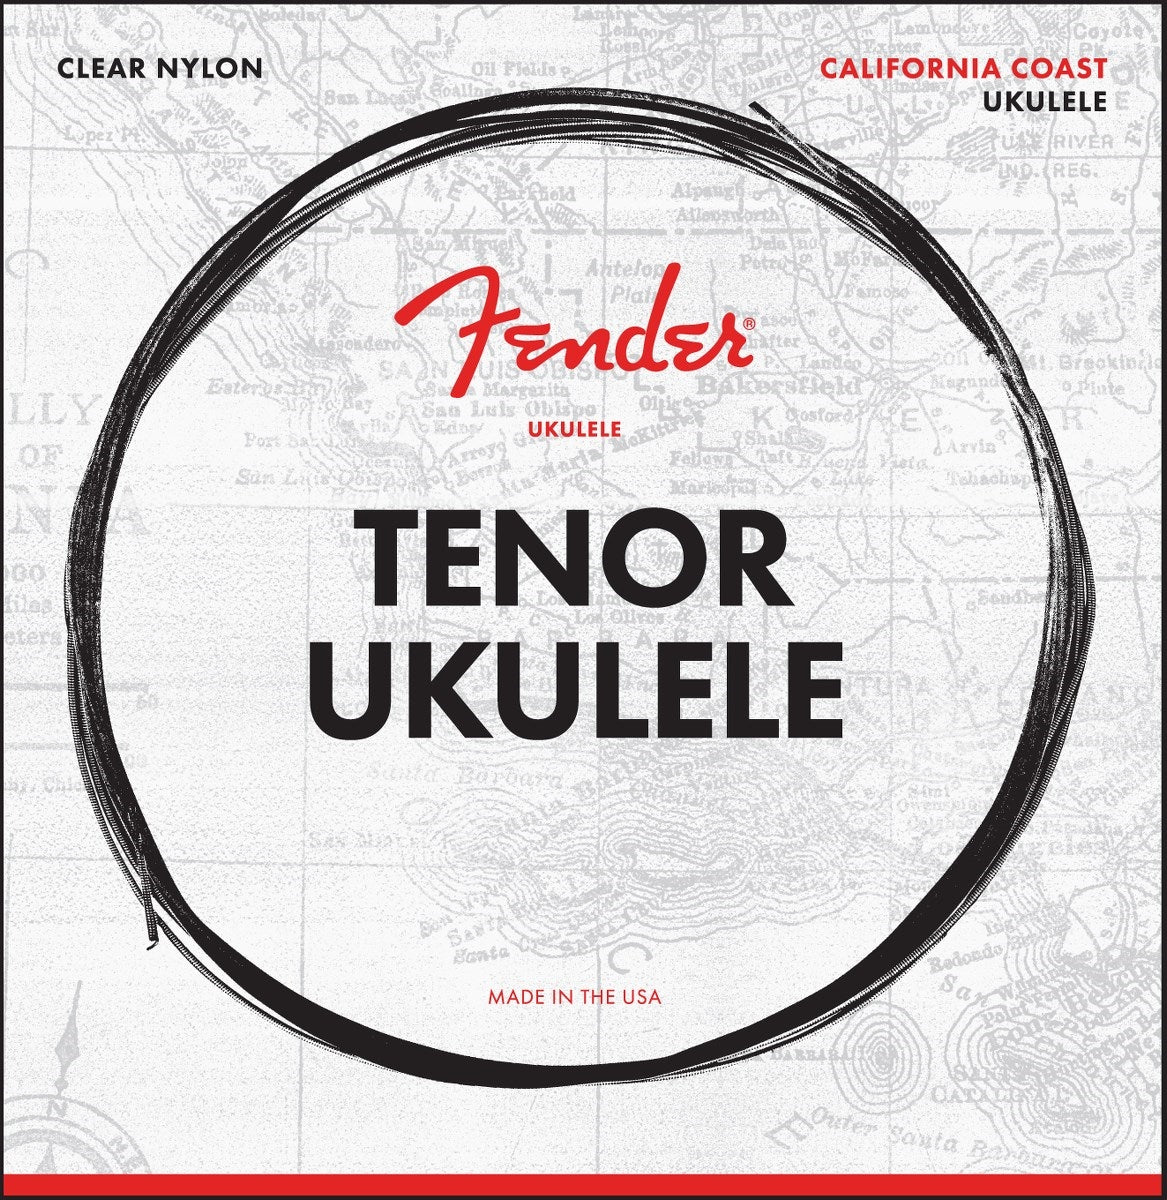 Fender California Coast Clear Nylon Ukulele String Set with Warm Clear Tones (Available in Soprano, Concert and Tenor)